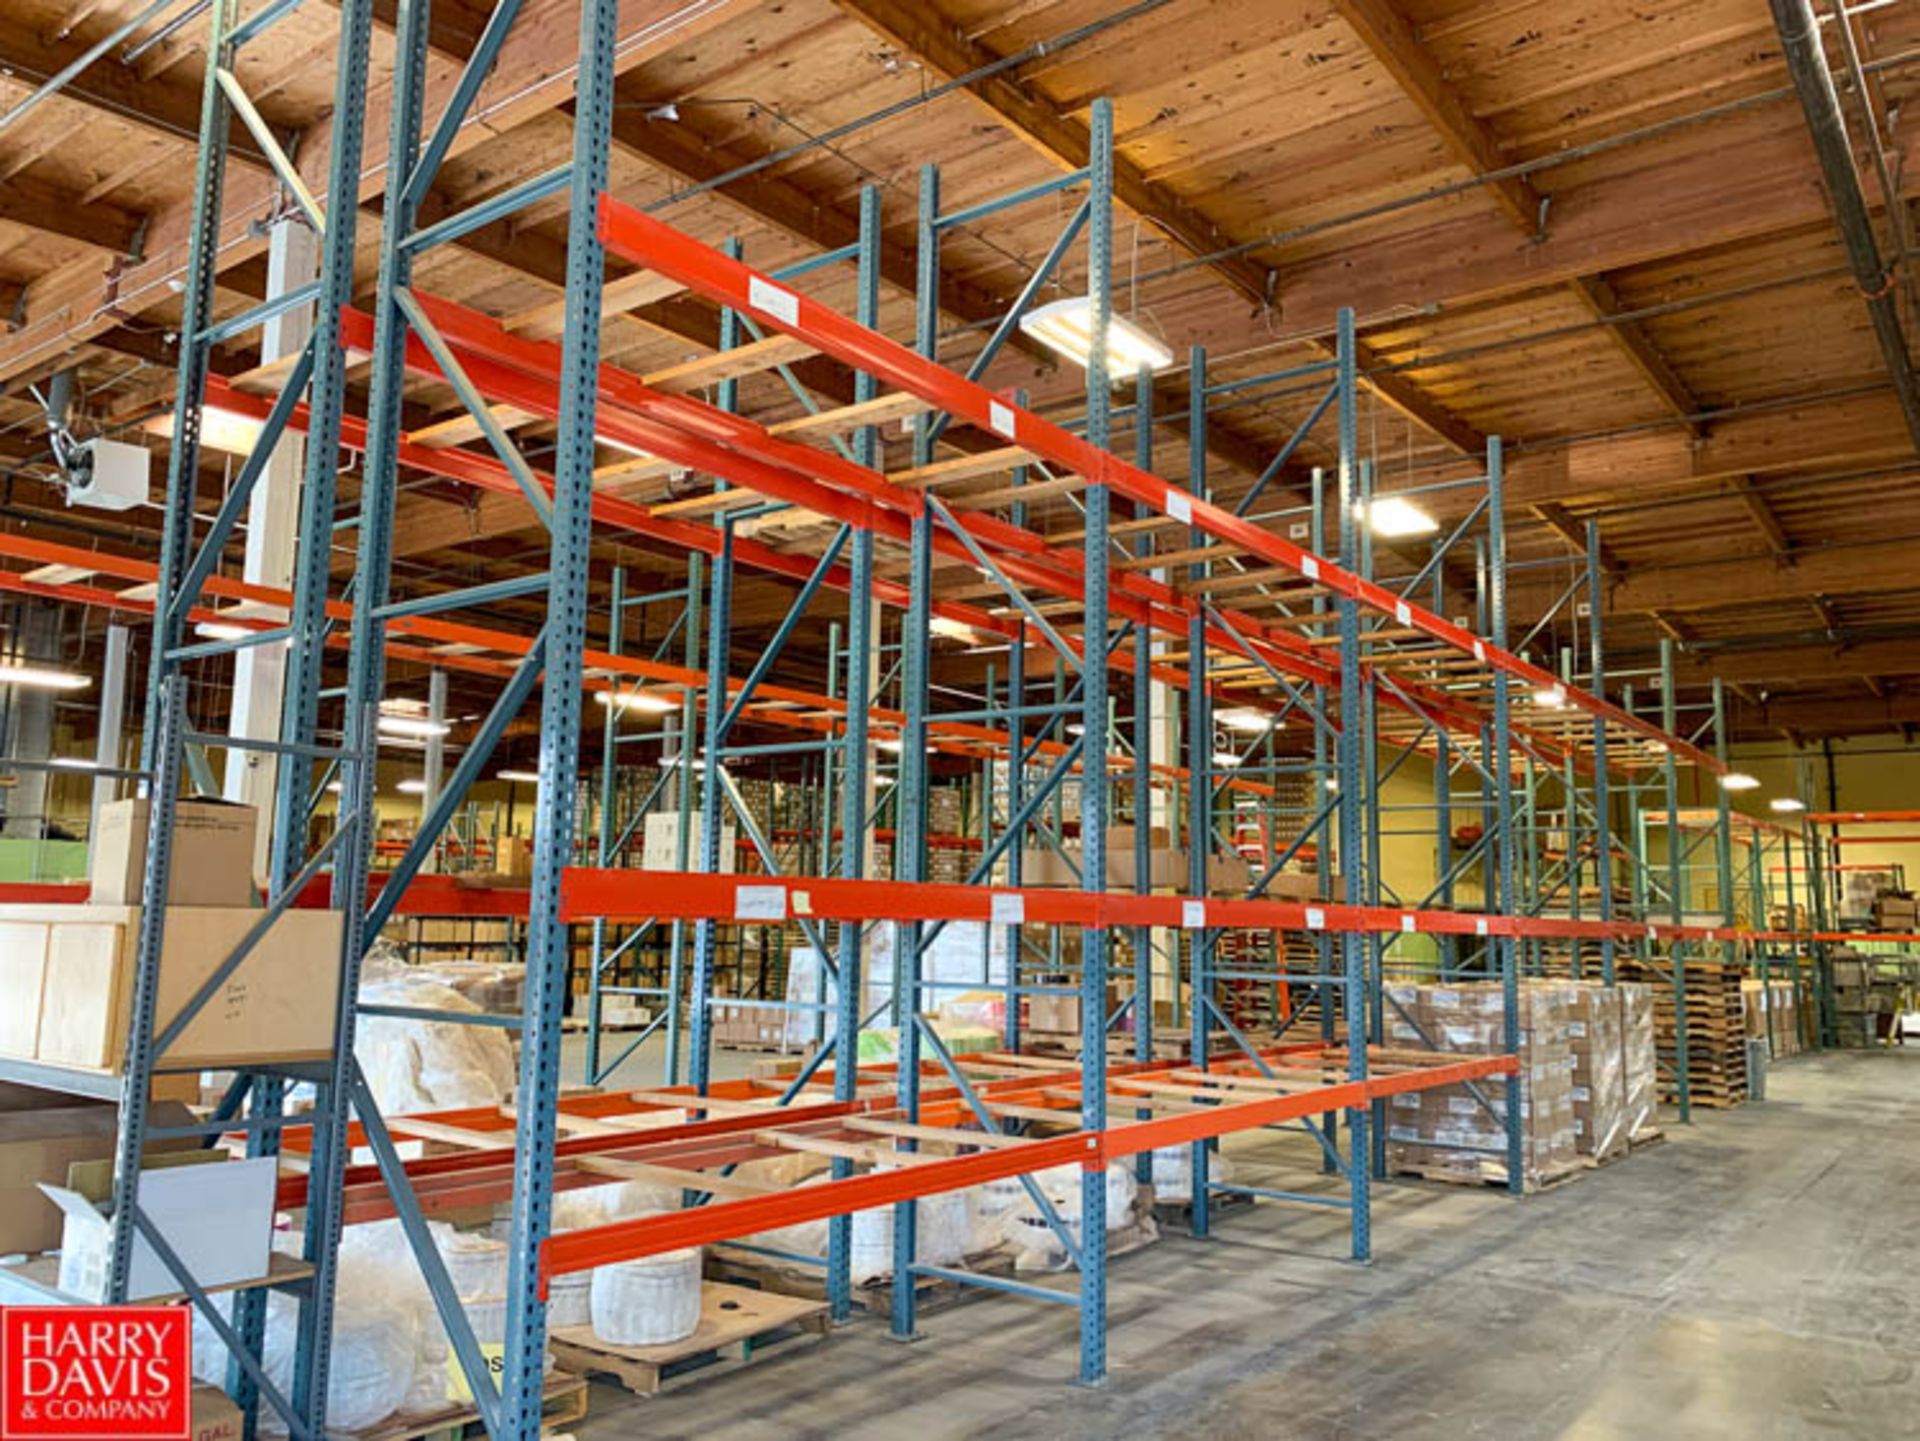 3-High x 1-Deep Medium-Duty Bolt-Type Drive-In Pallet Racking Sections Rigging Fee: $1500